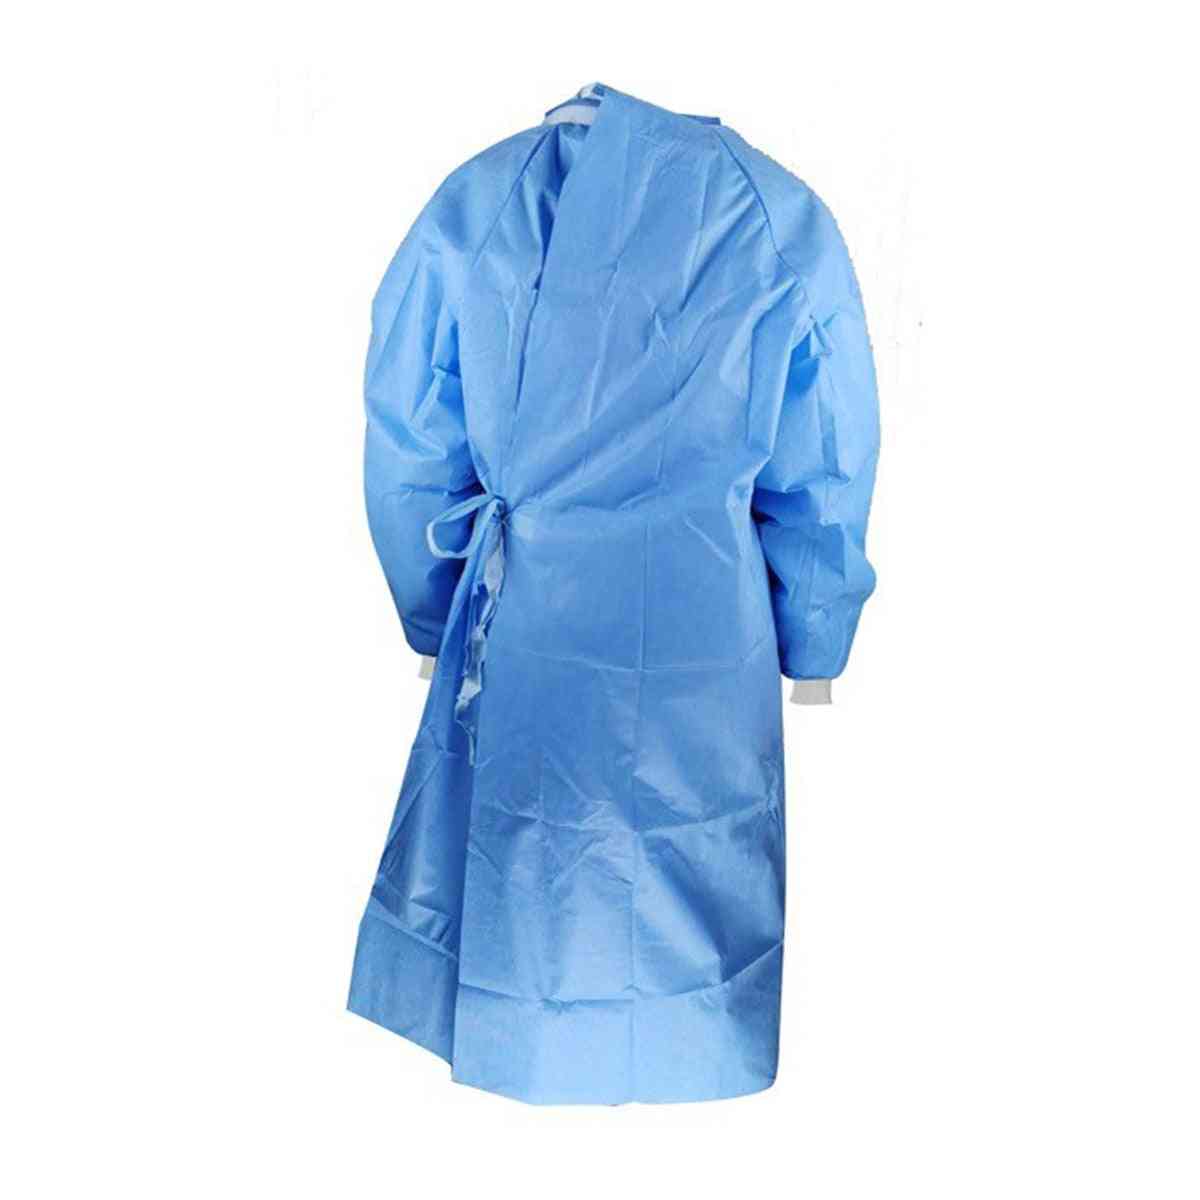 Disposable Protective, Dustproof & Waterproof, Isolation Gown Suit